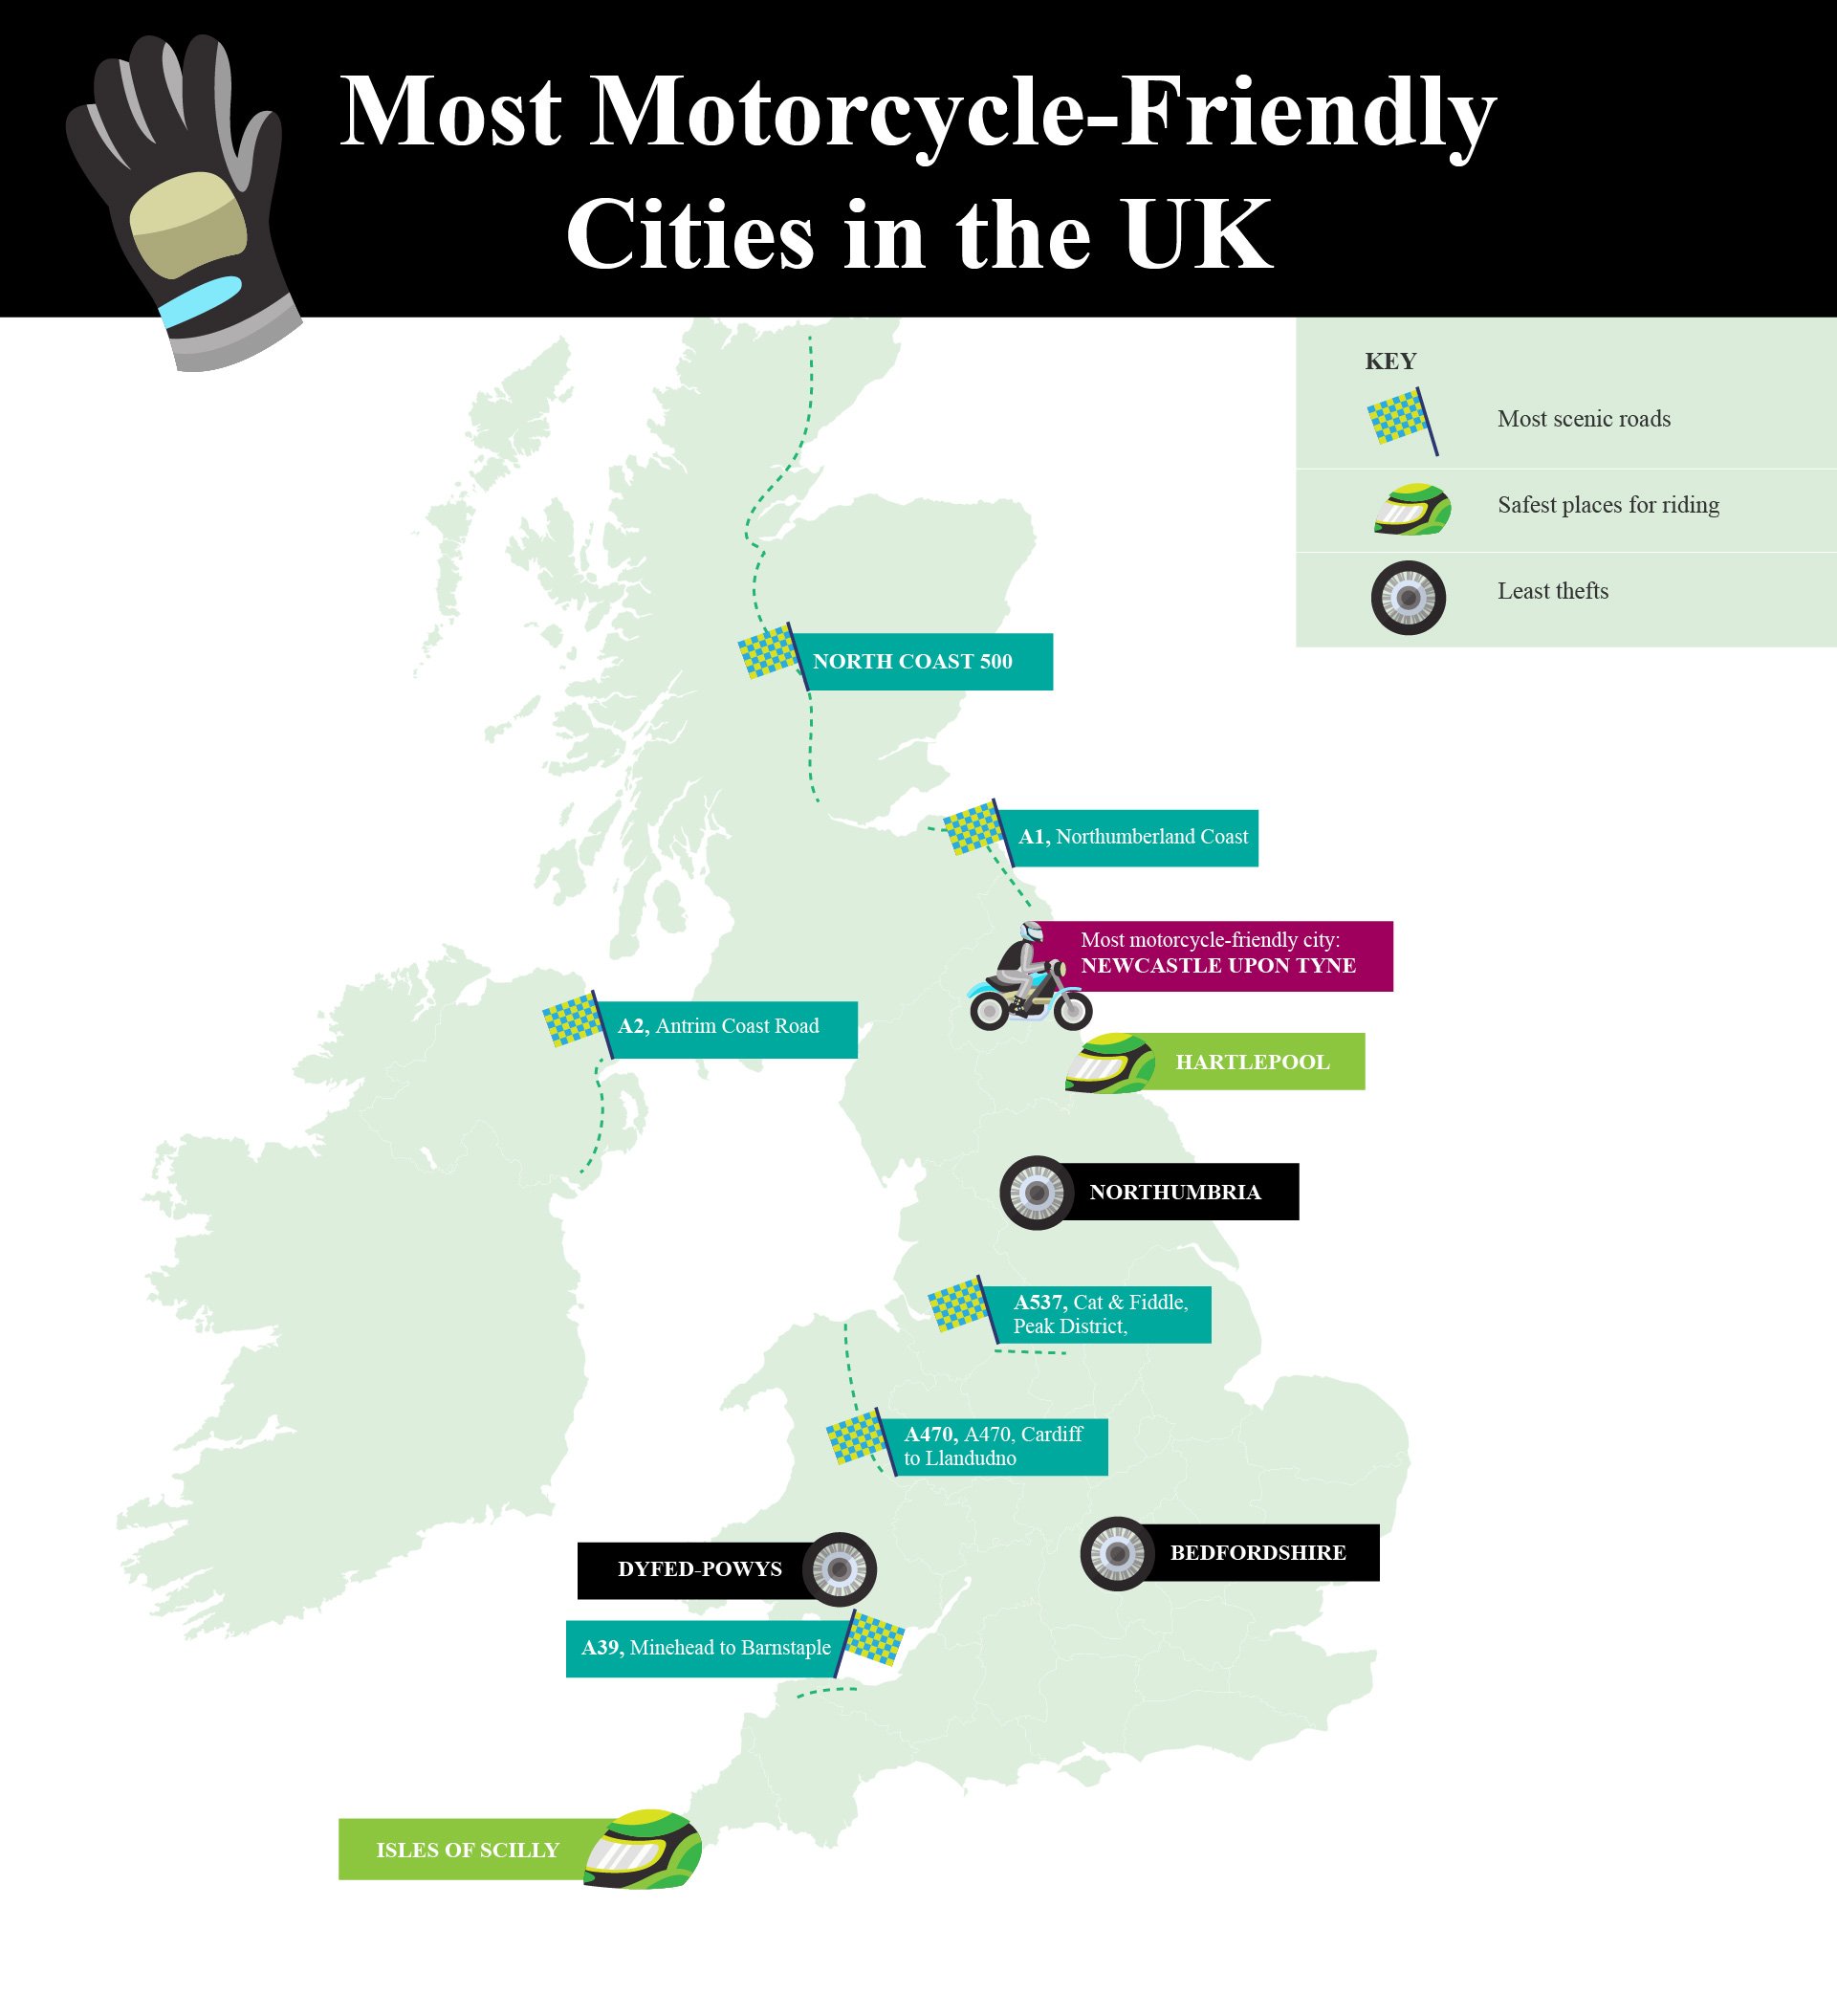 Map of the most motorcycle-friendly cities in the UK. Motolegends finds that Newcastle Upon Tyne is the UK’s most motorbike-friendly city.